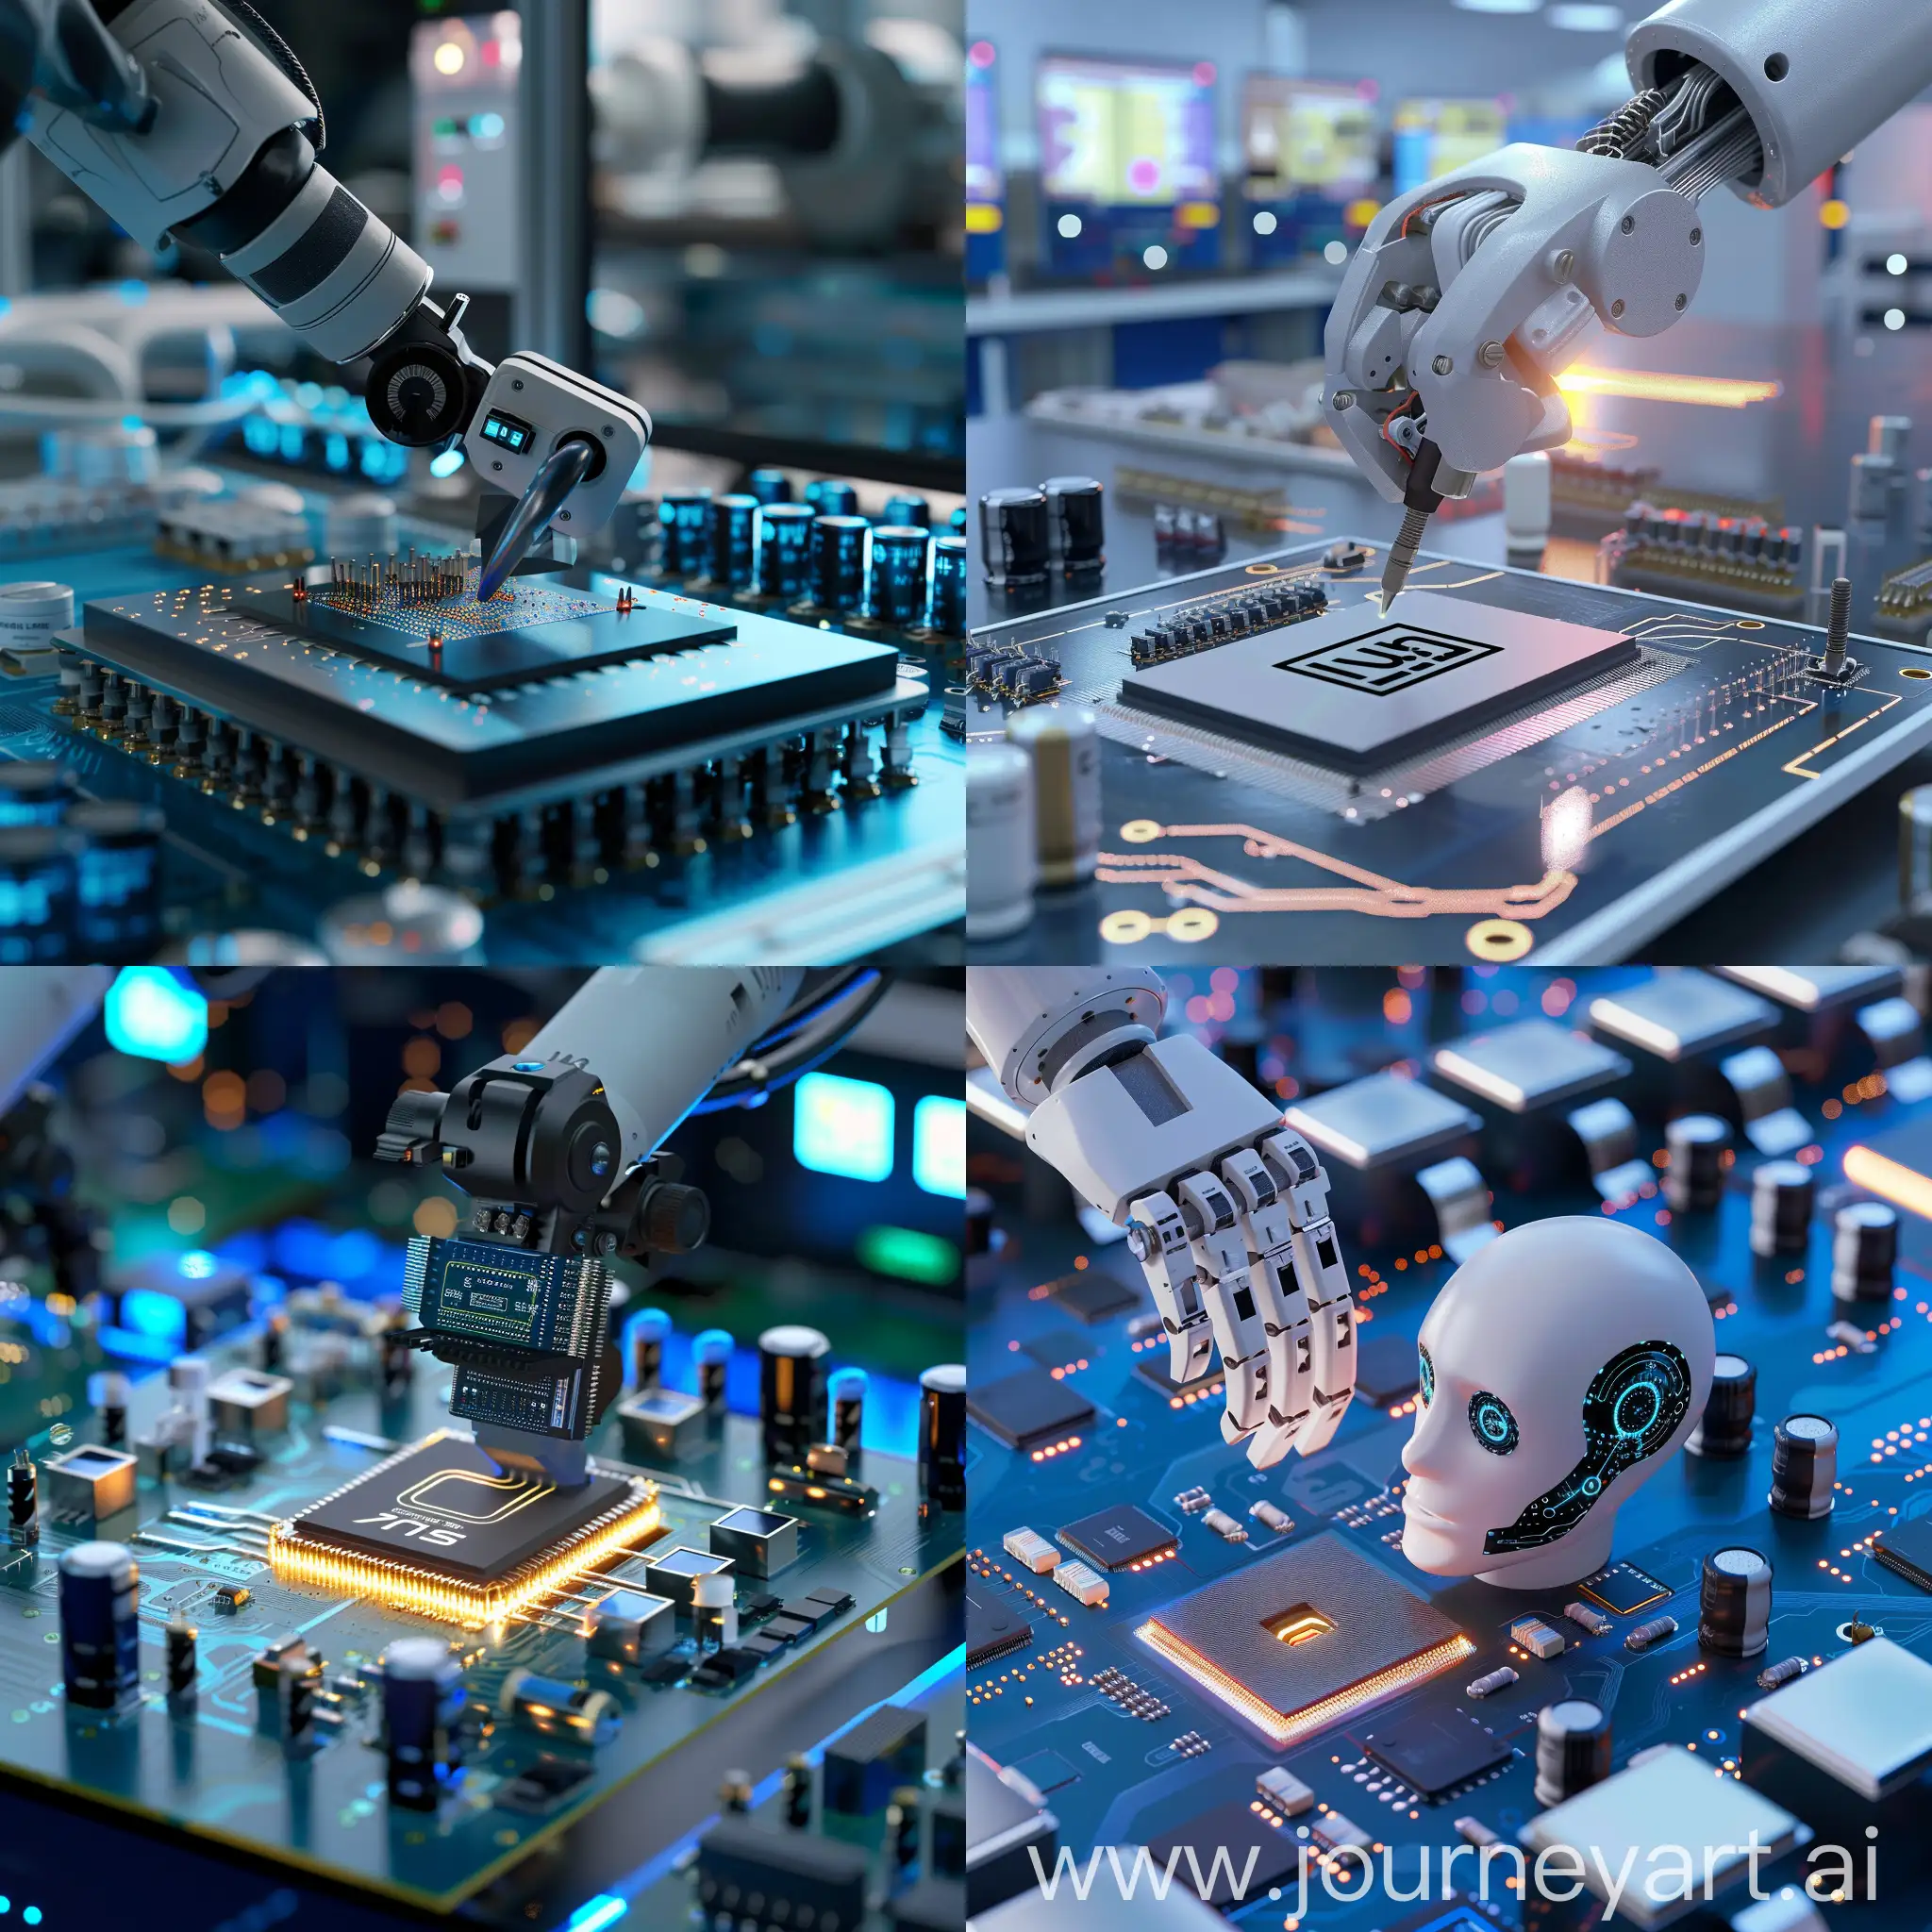 create an imagine to symbolize AI applications in semiconductor manufacturing. especially backend manufacturing like testing or packaging.